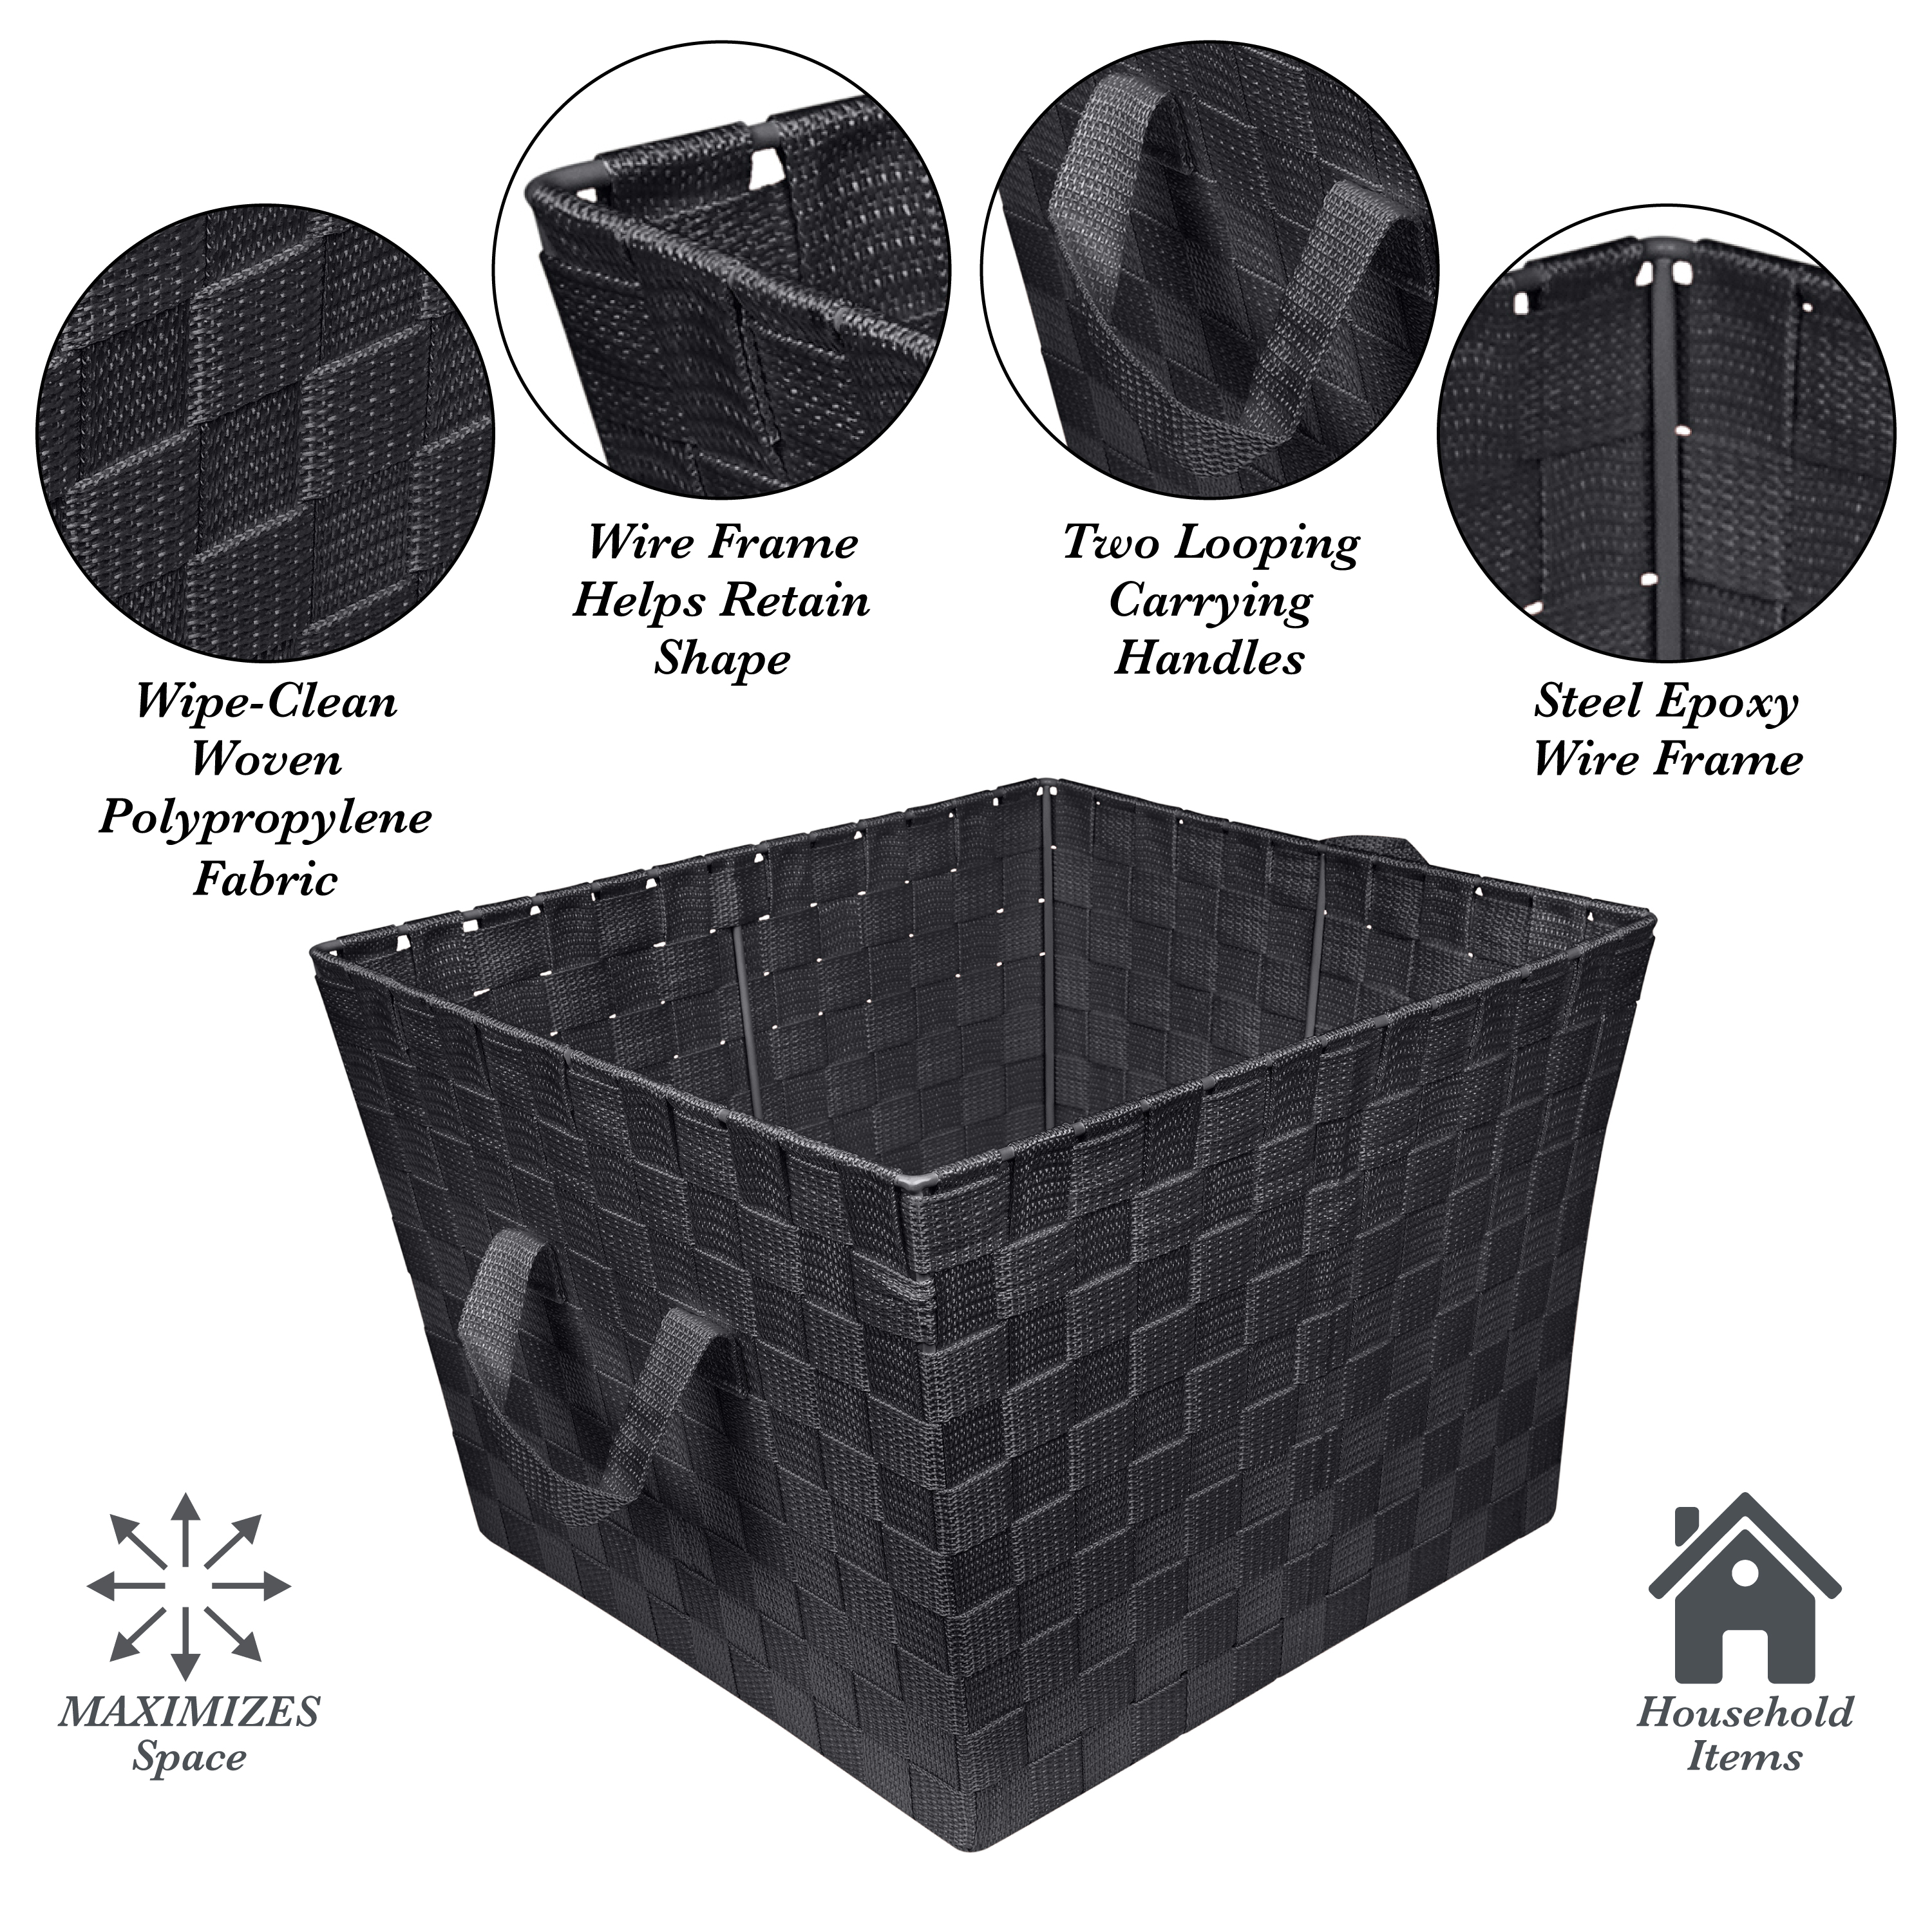 Simplify Large Woven Fabric Storage Basket in Black - image 3 of 8